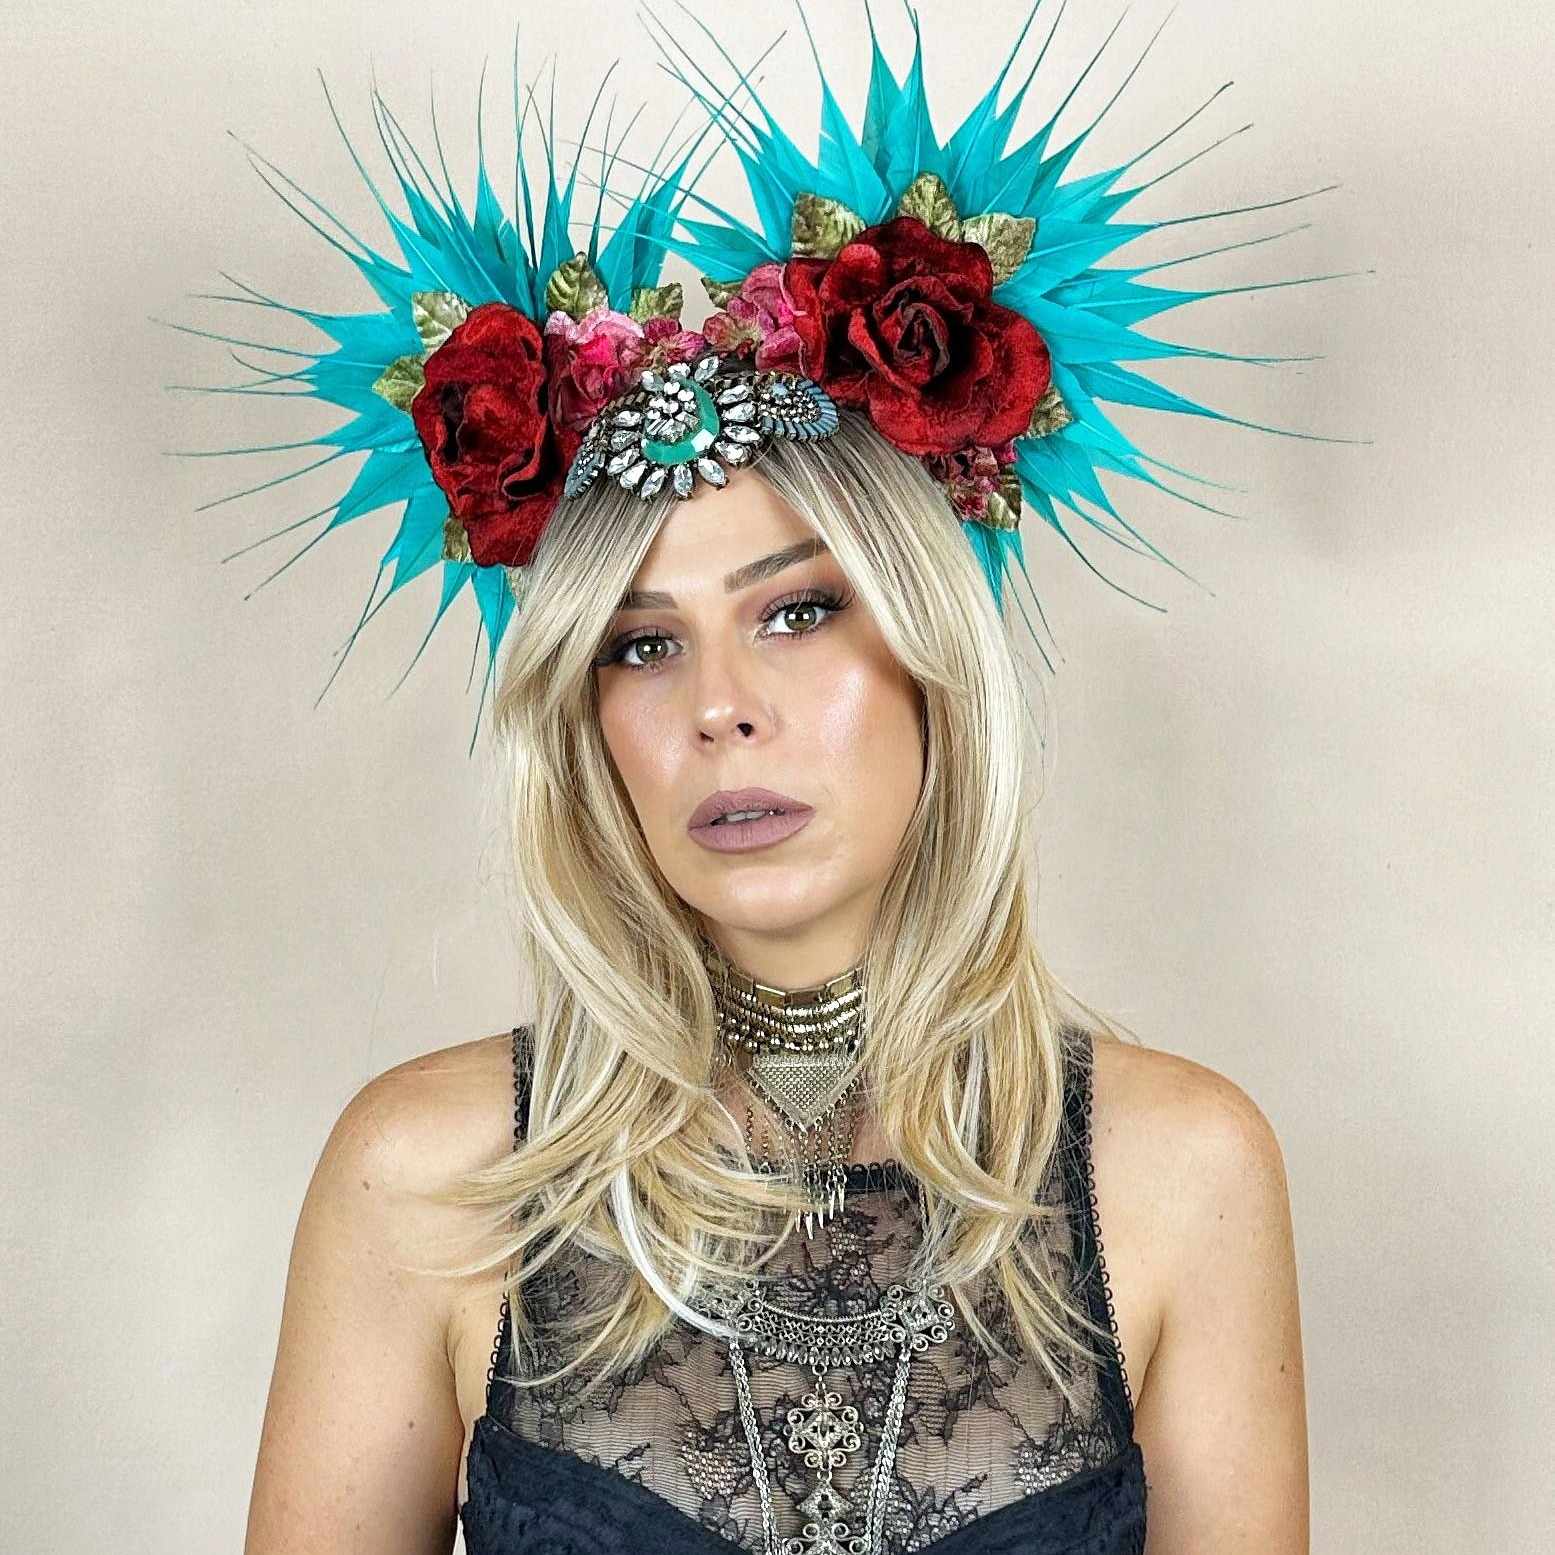 statement luxe headpiece for the races , met gala, festivals and special events